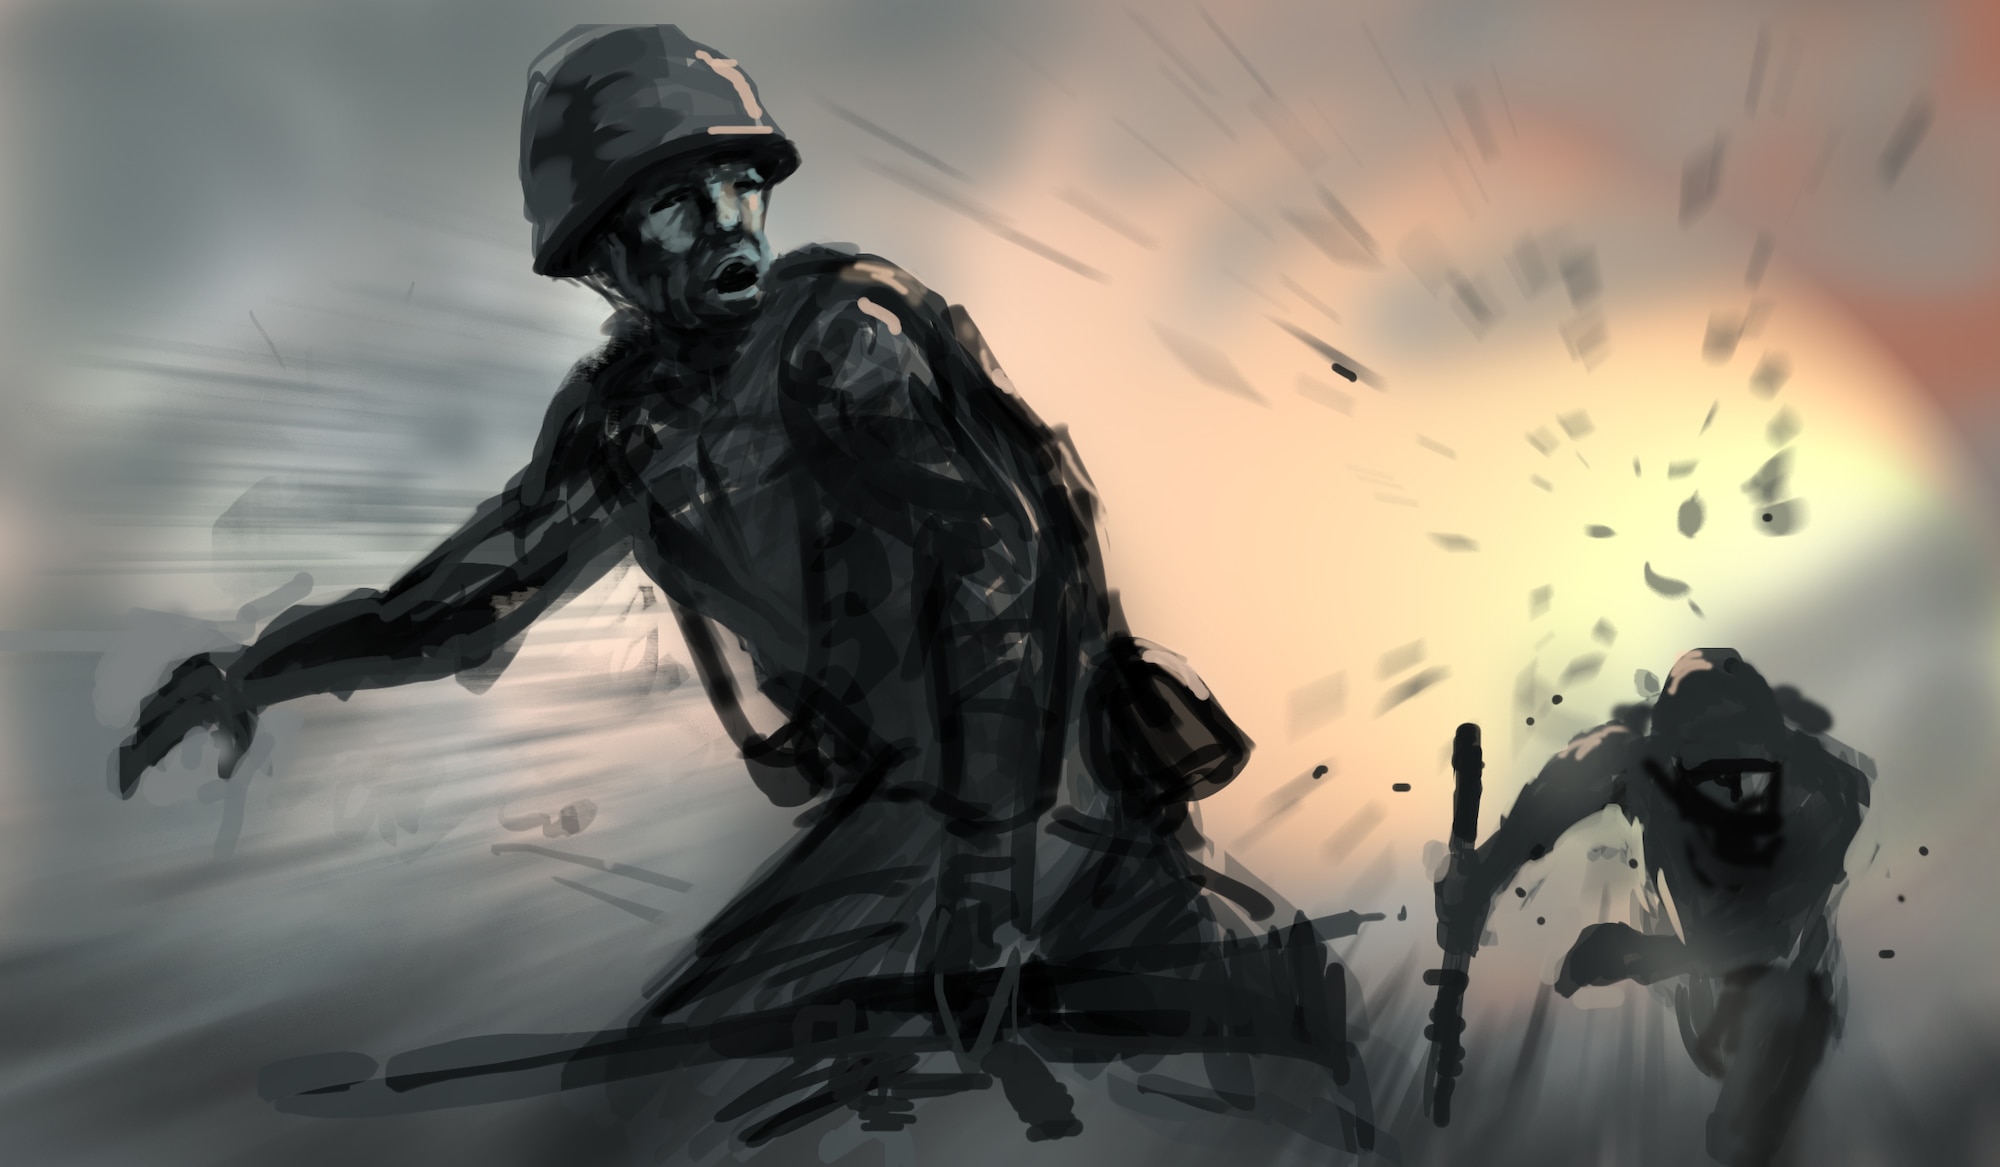 Digital painting created in Adobe Photoshop. This artwork was created to depict the US Army occupation in Vietnam and was inspired by the story of a Vietnam war veteran in Monterey, Calif. March 3, 2014. (U.S. Air Force art by Master Sgt. Elizabeth Concepcion/Released)